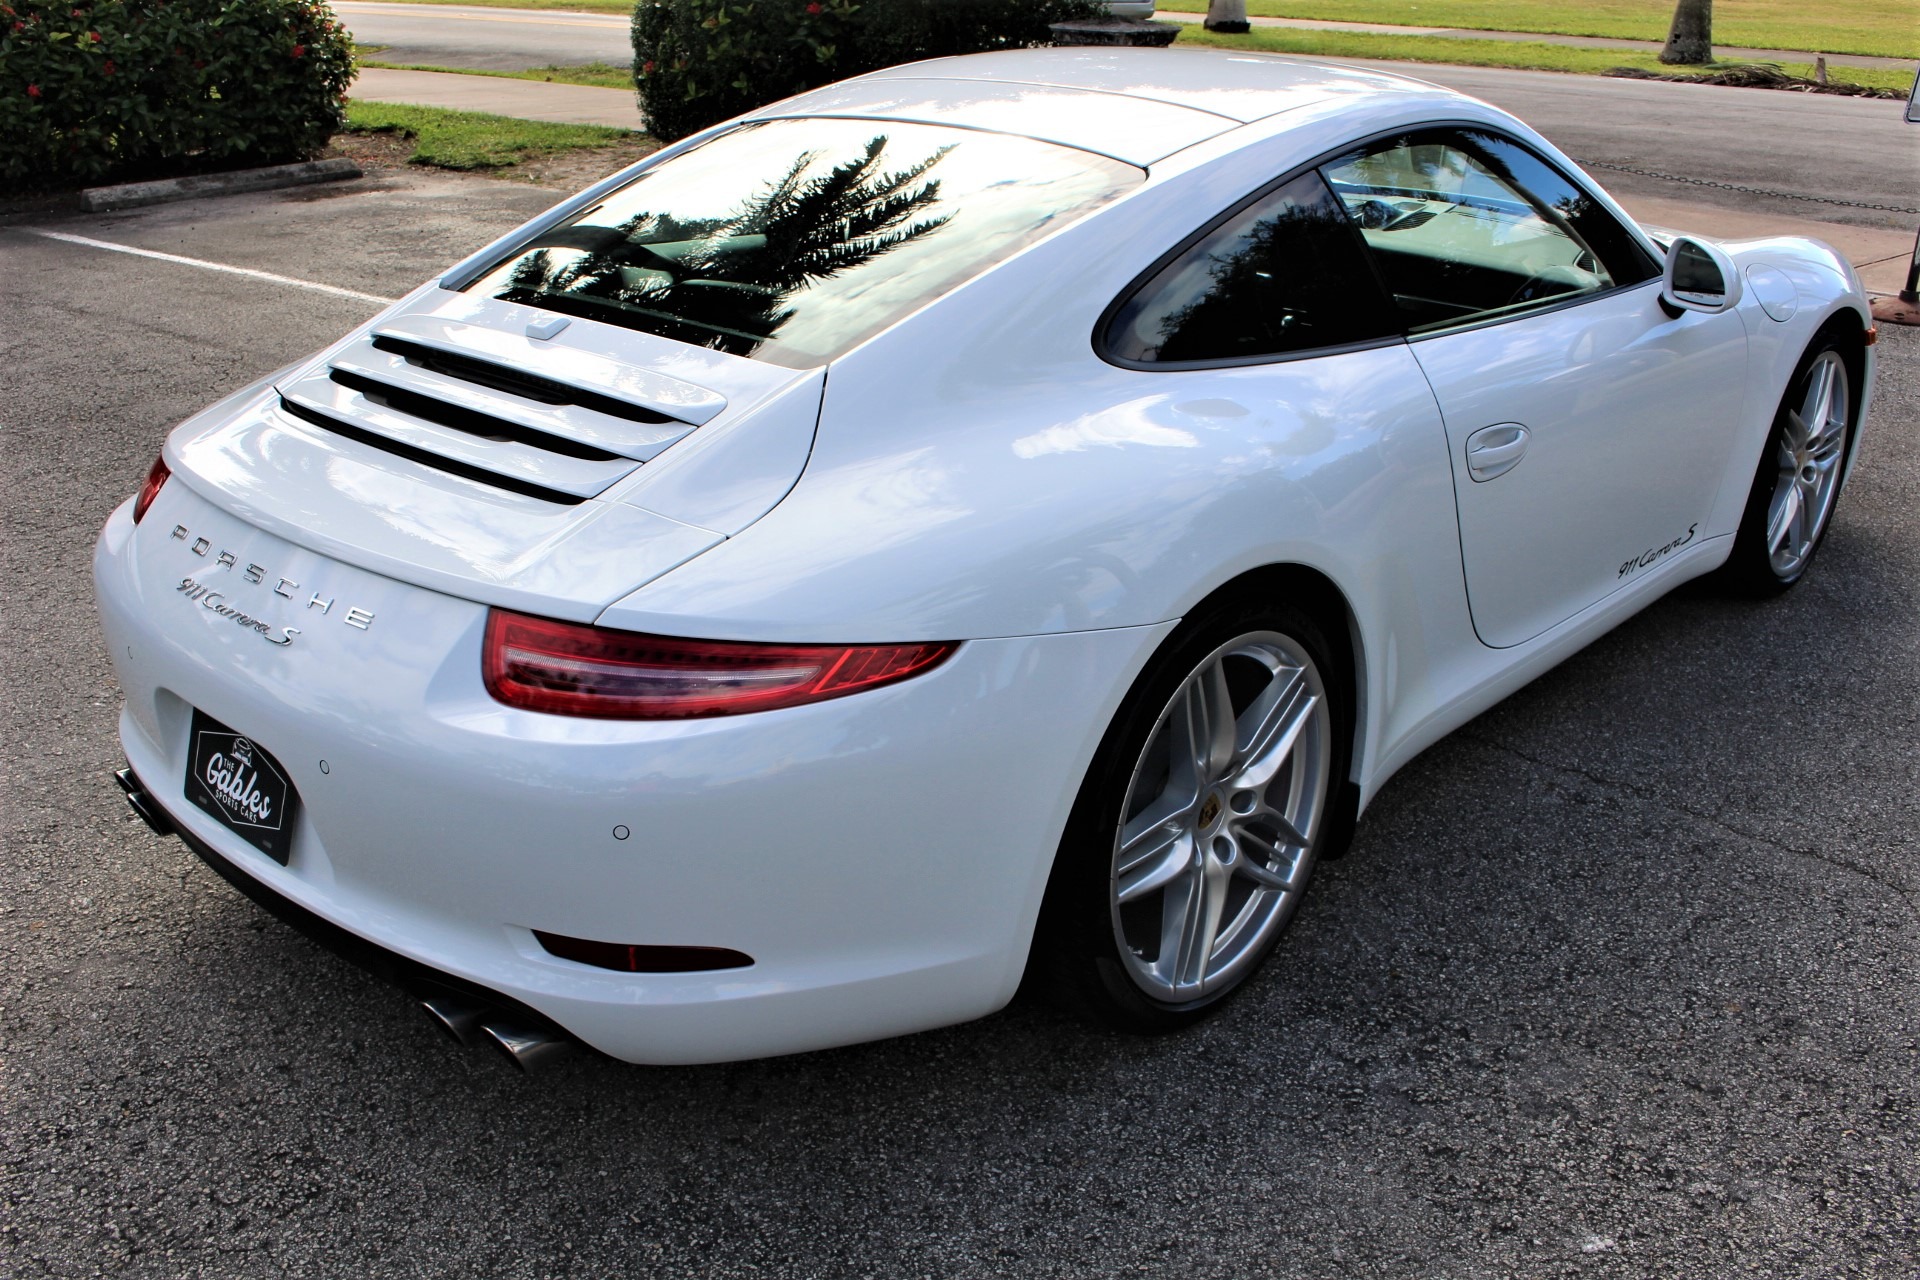 Used 2016 Porsche 911 Carrera S for sale Sold at The Gables Sports Cars in Miami FL 33146 4